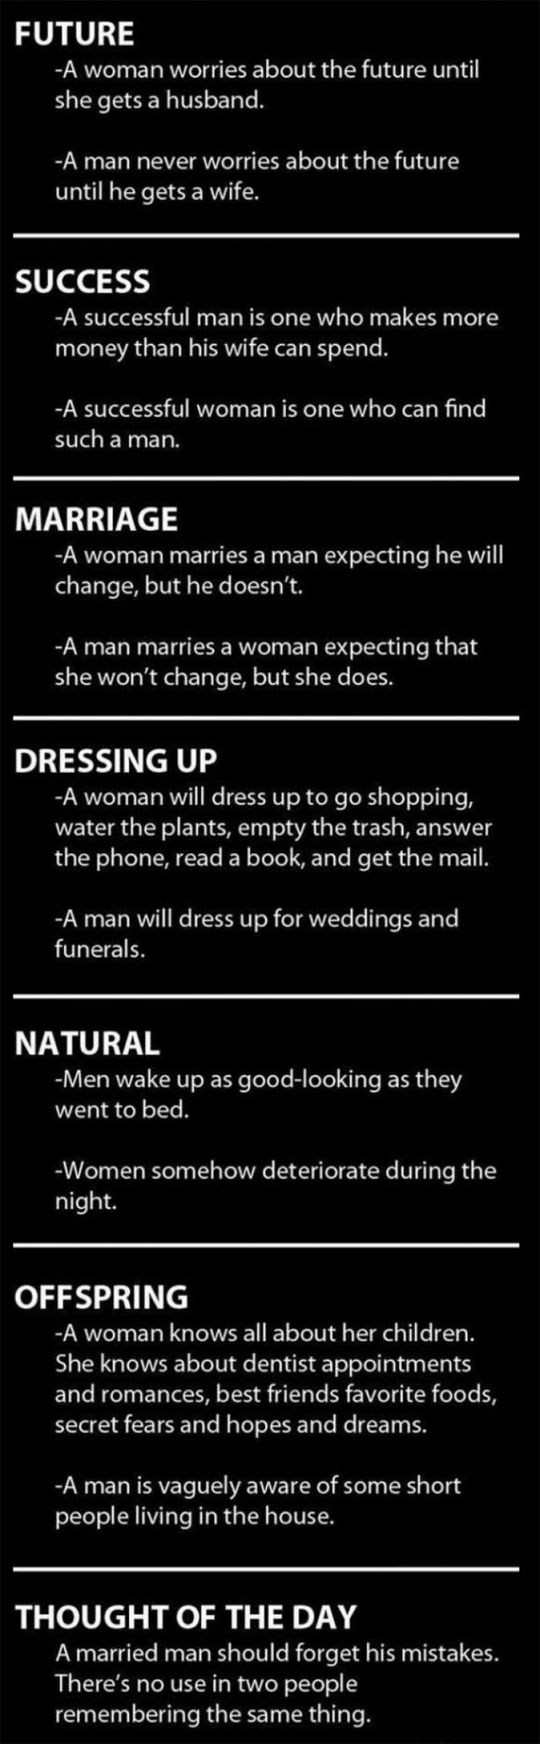 funny-men-women-difference-kids-future